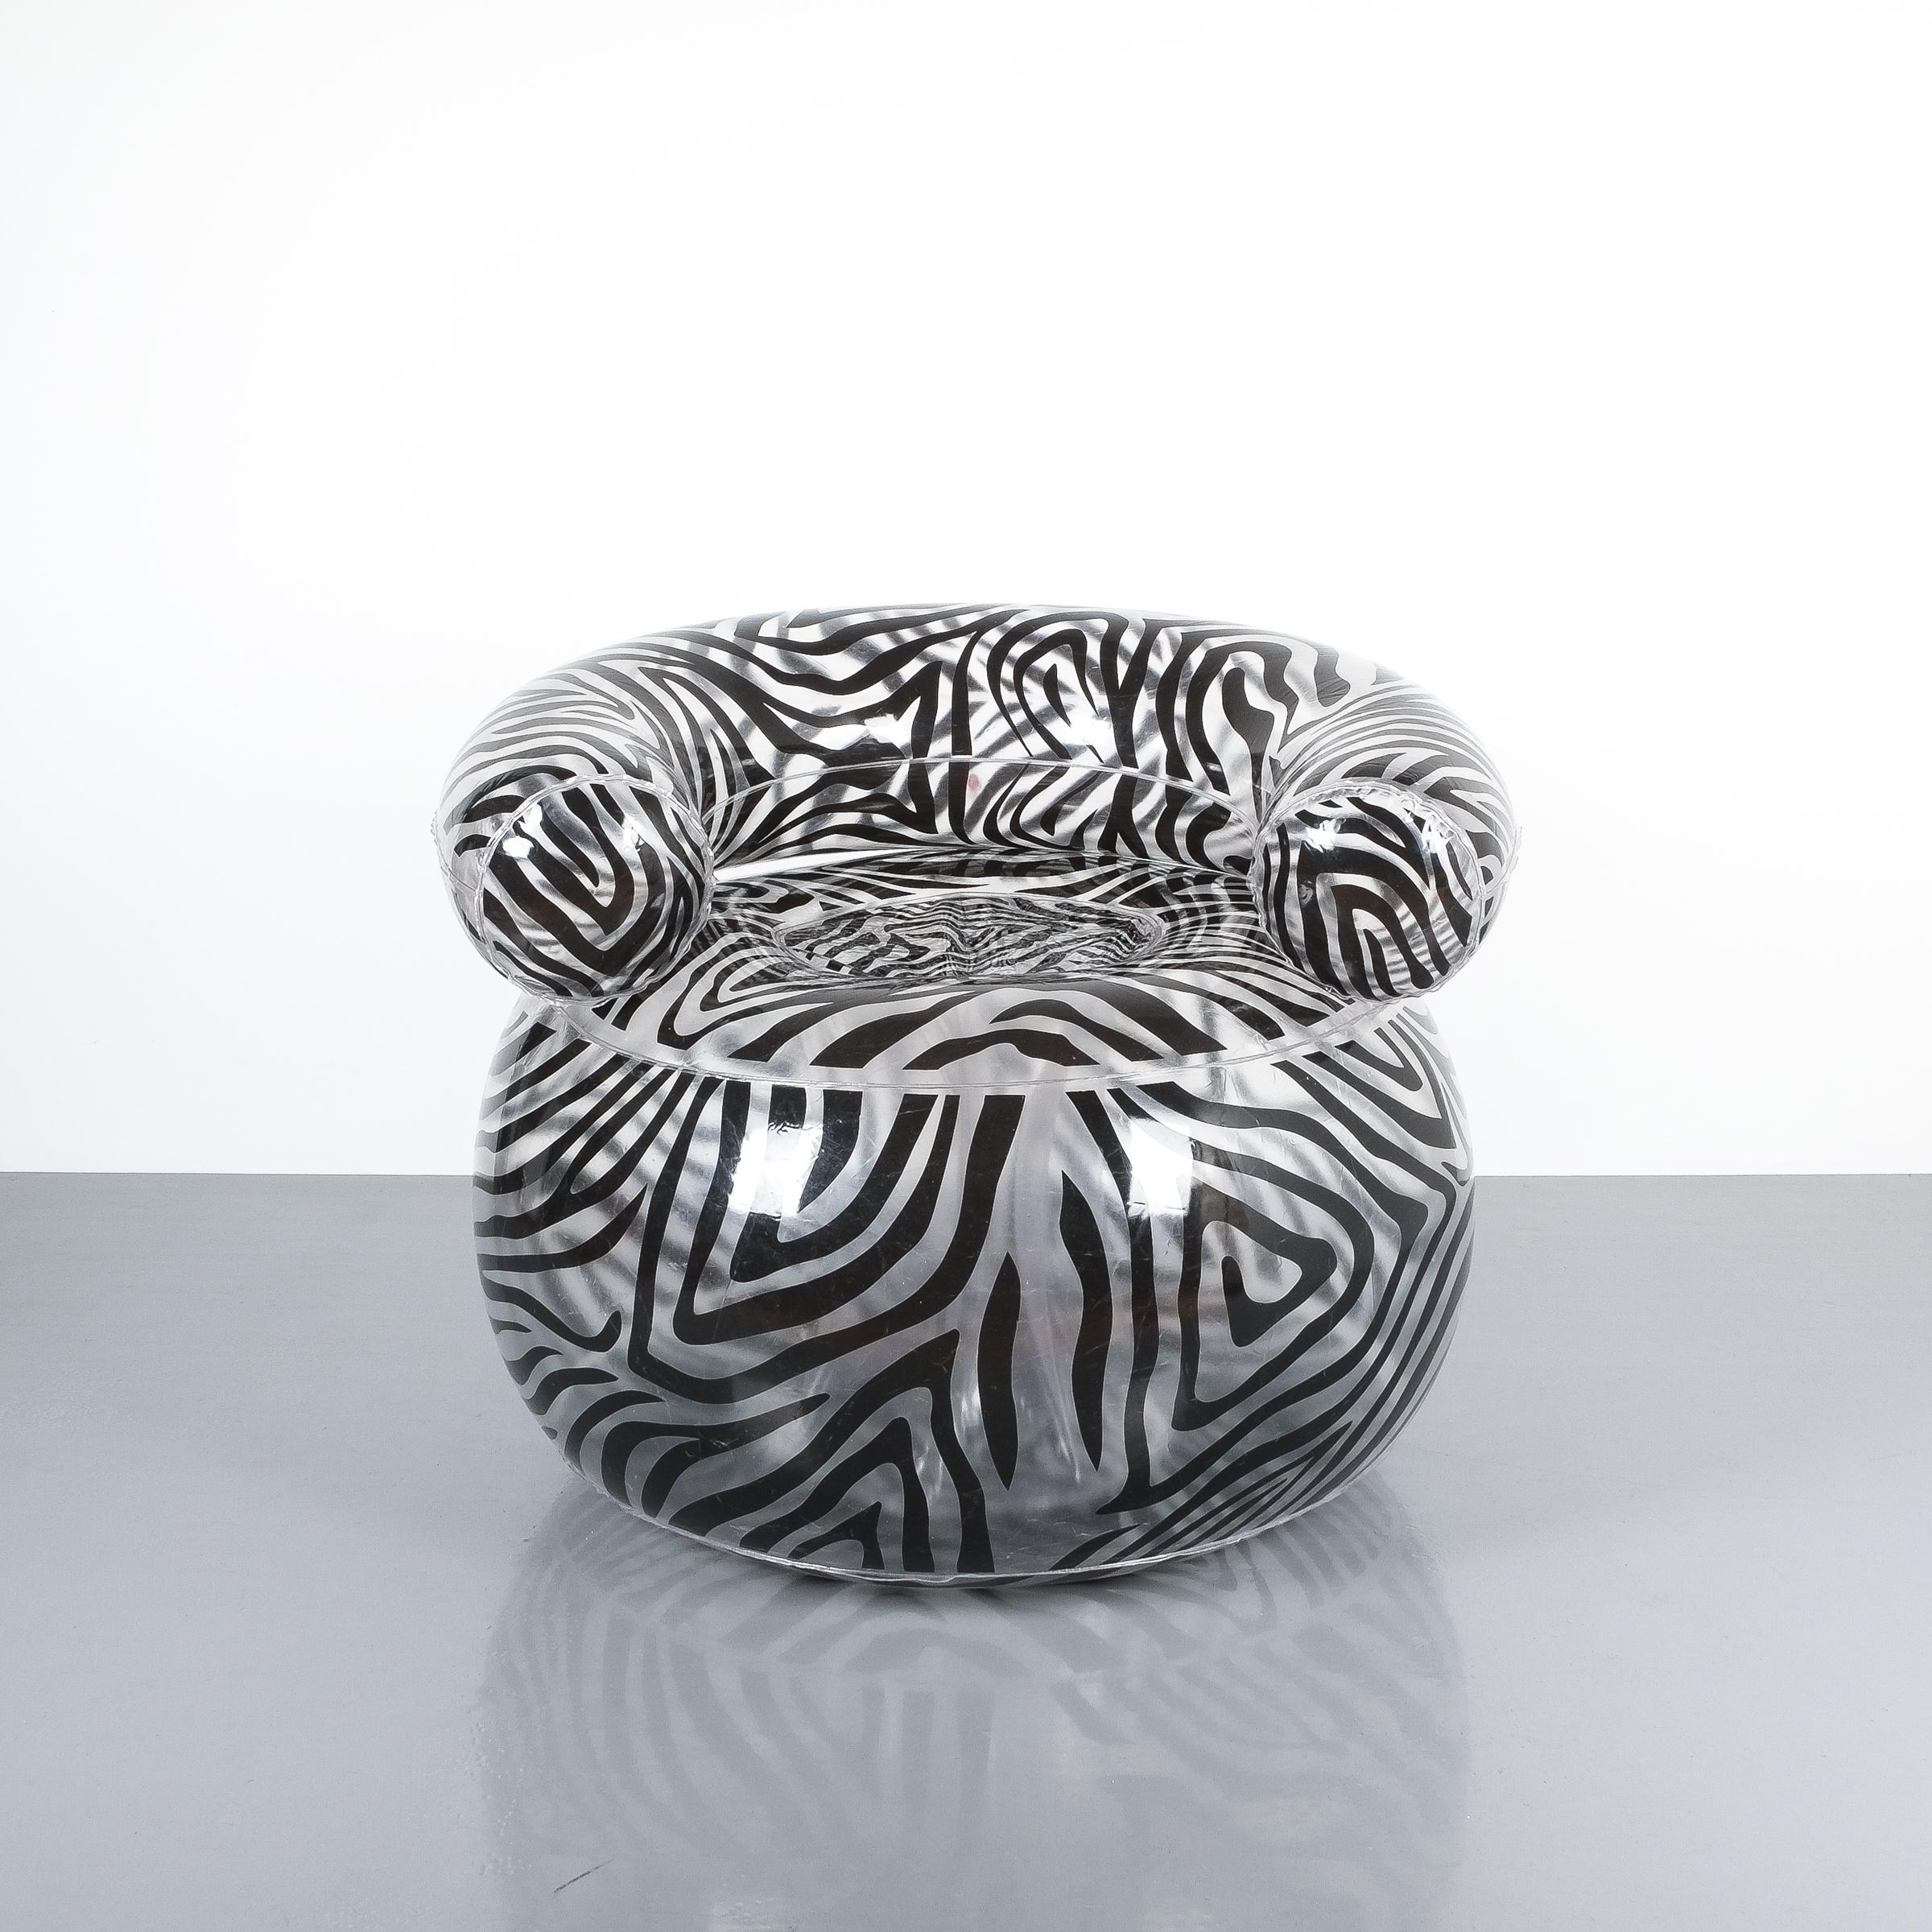 Rare blow chair by Alexis Lahellec, Paris, 1996. Nice zebra pattern chair, fully comprised of PVC. Good condition. 
